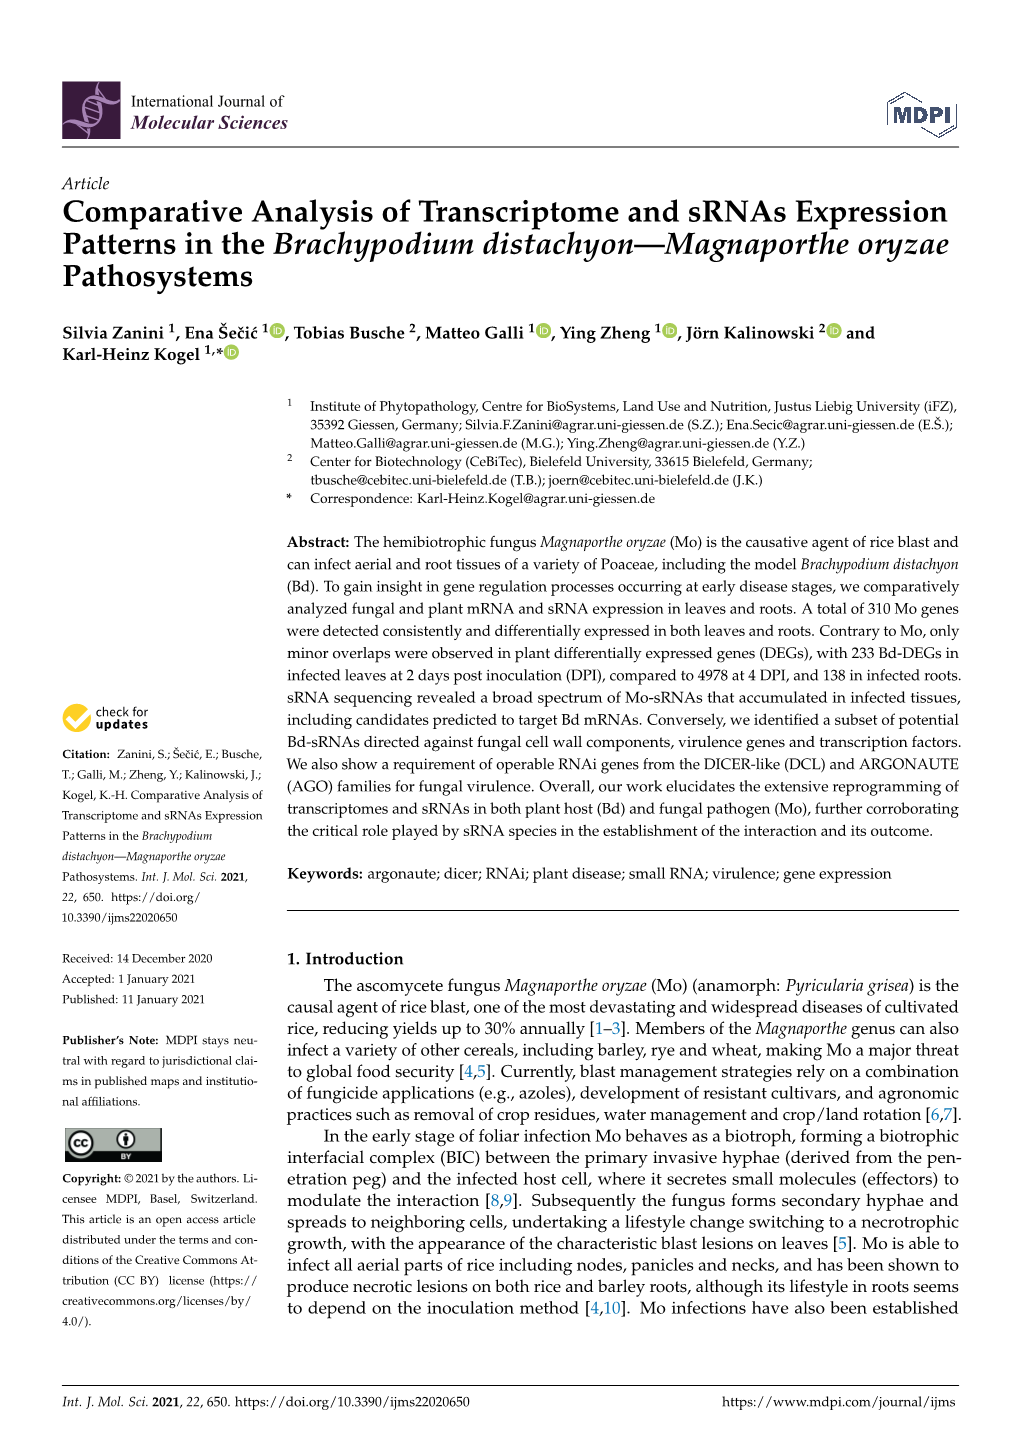 Comparative Analysis of Transcriptome and Srnas Expression Patterns in the Brachypodium Distachyon—Magnaporthe Oryzae Pathosystems